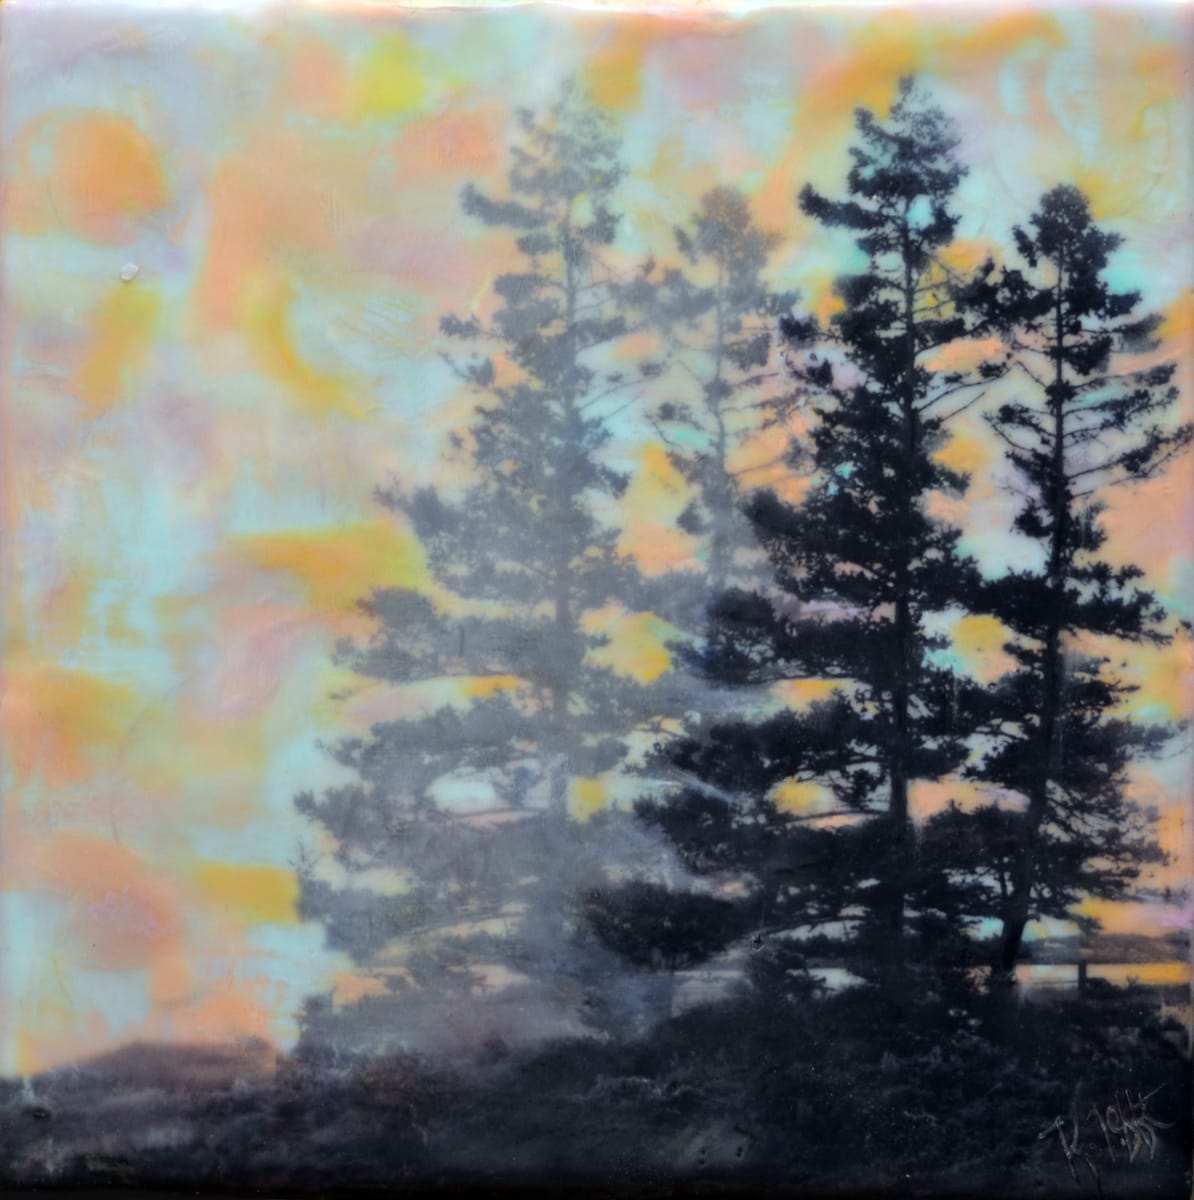 Retreat by Kristianne Tefft  Image: These trees stand on their own and won’t retreat into the background.  This artwork was created by torch fusing and layering clear encaustic medium, encaustic paints, and by burnishing images of trees taken in Detour, MI.
